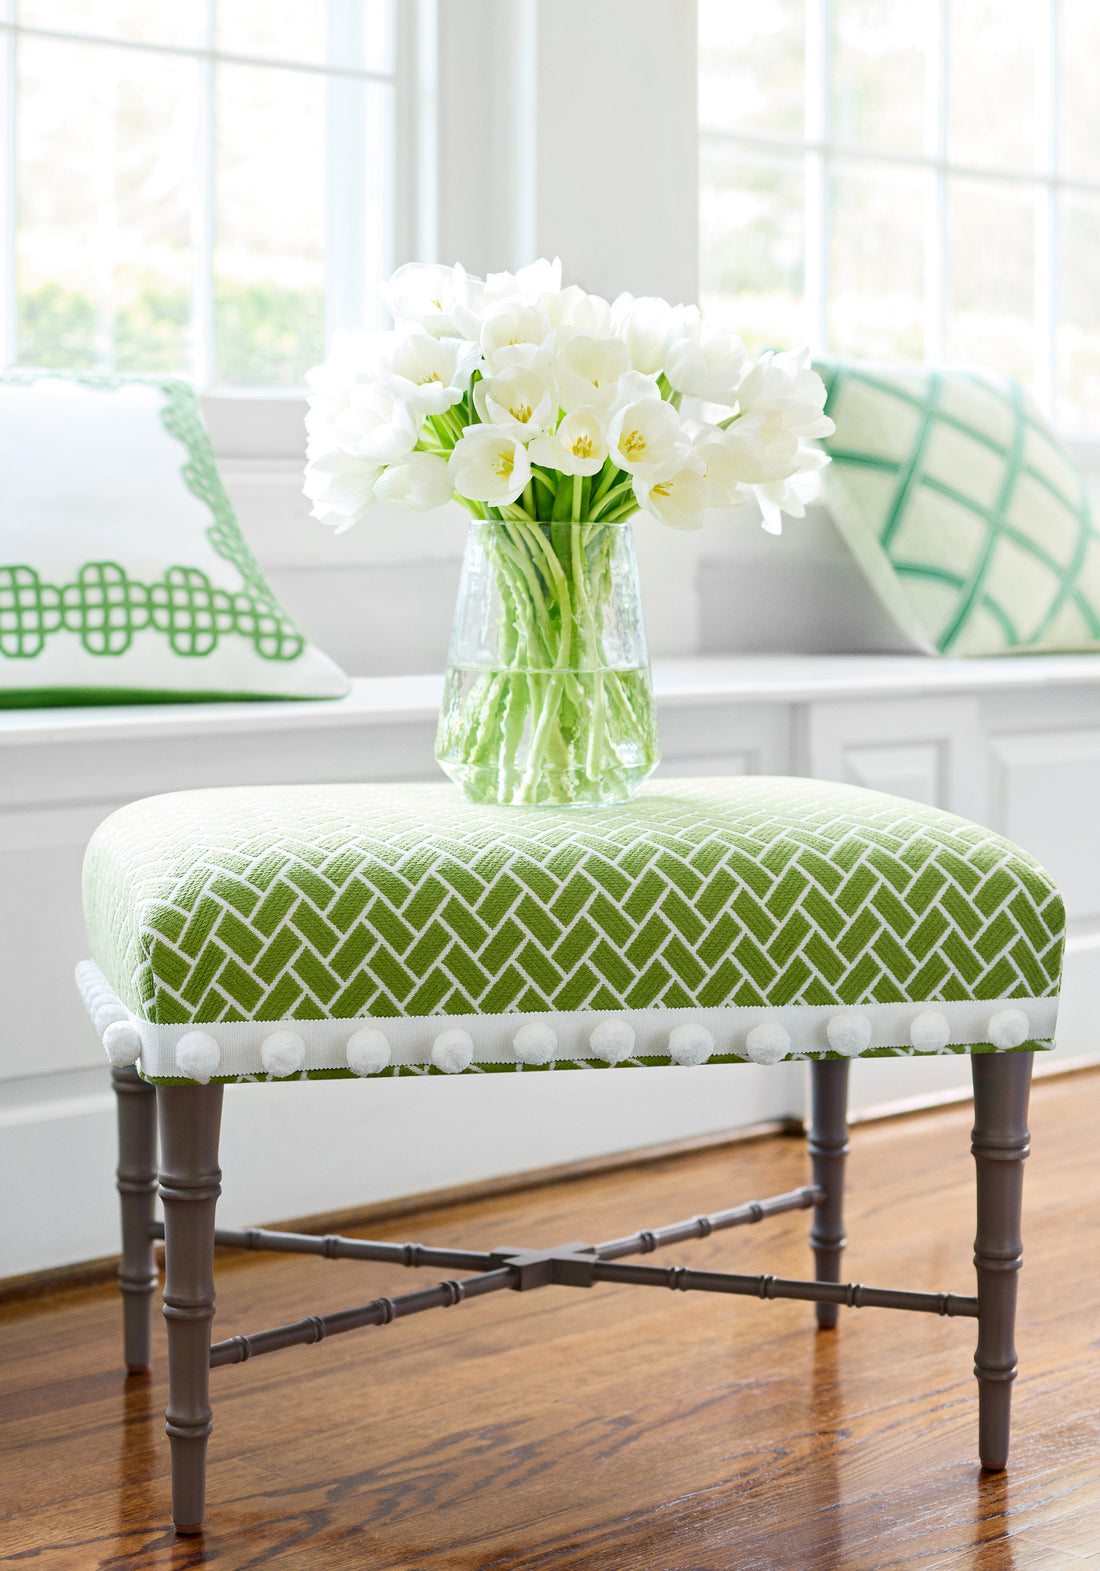 Eaton Ottoman in Thibaut cobblestone fabric in spring color - pattern number W74218